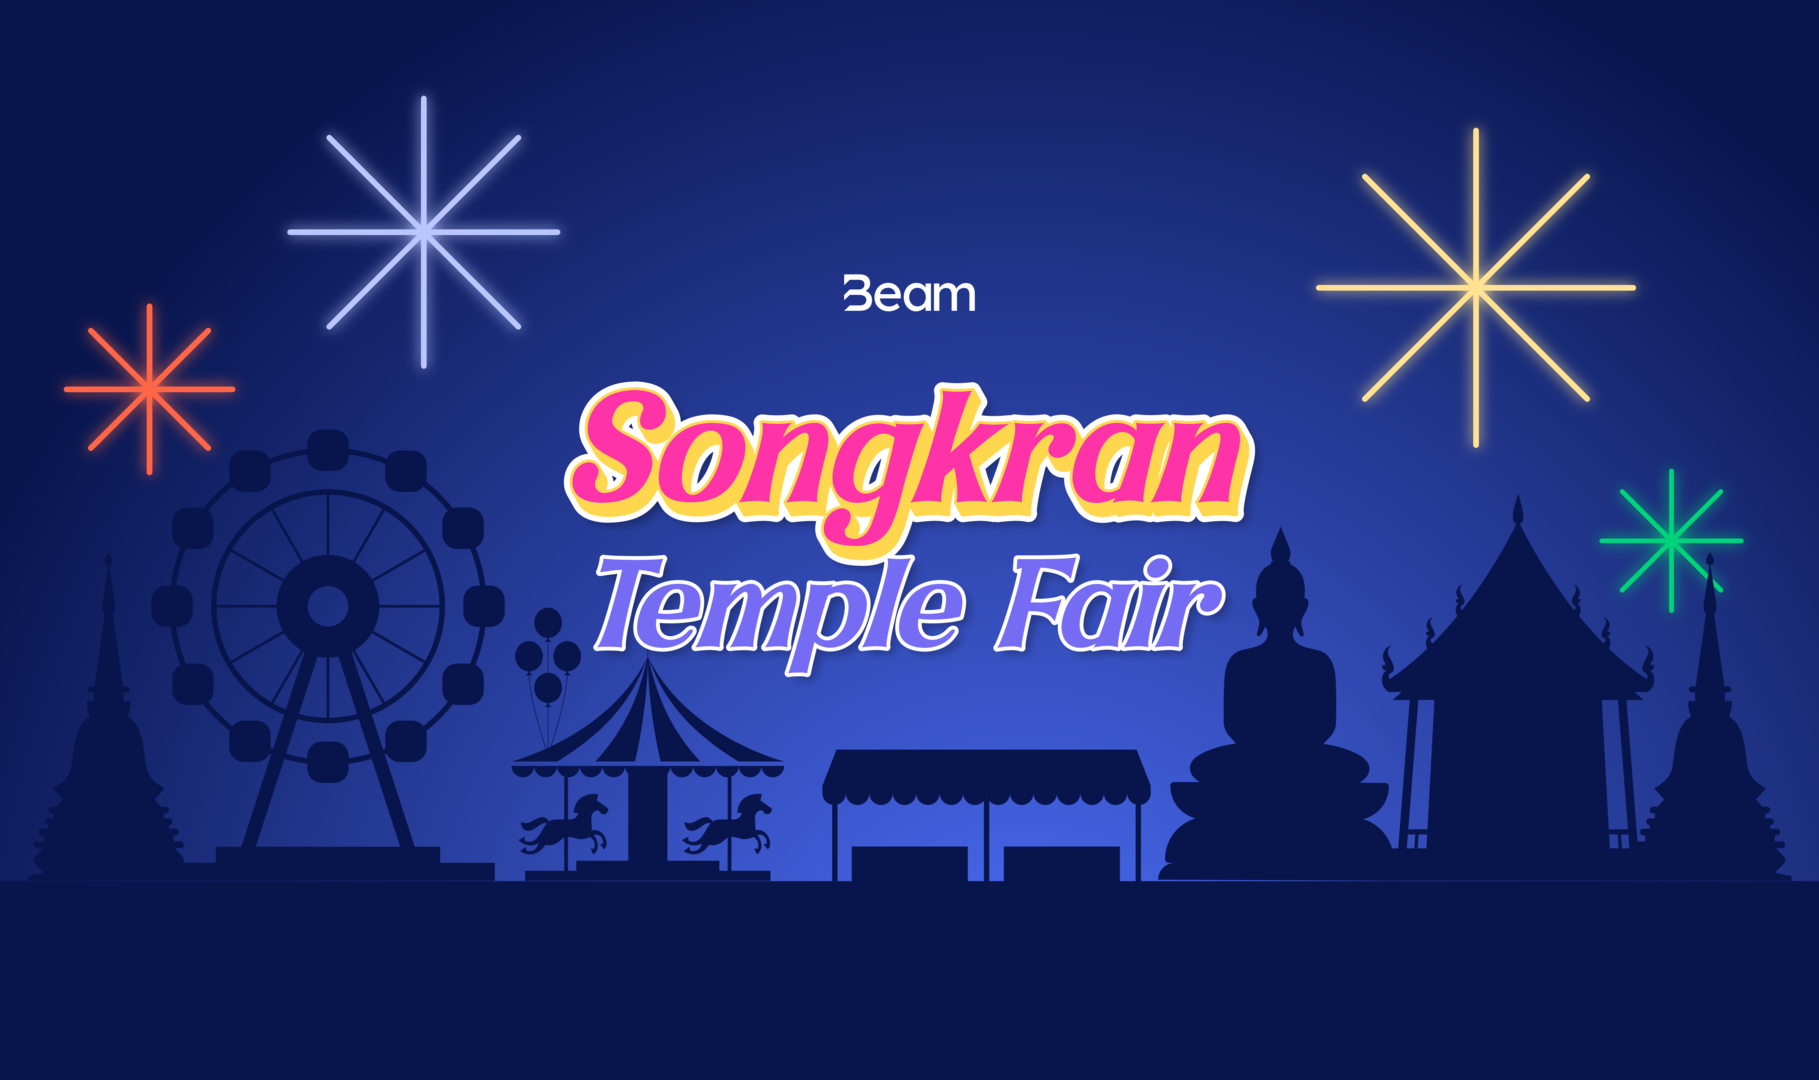 Celebrate Songkran Day with Beam: Dive into Our Retro Temple Fair Festivities!